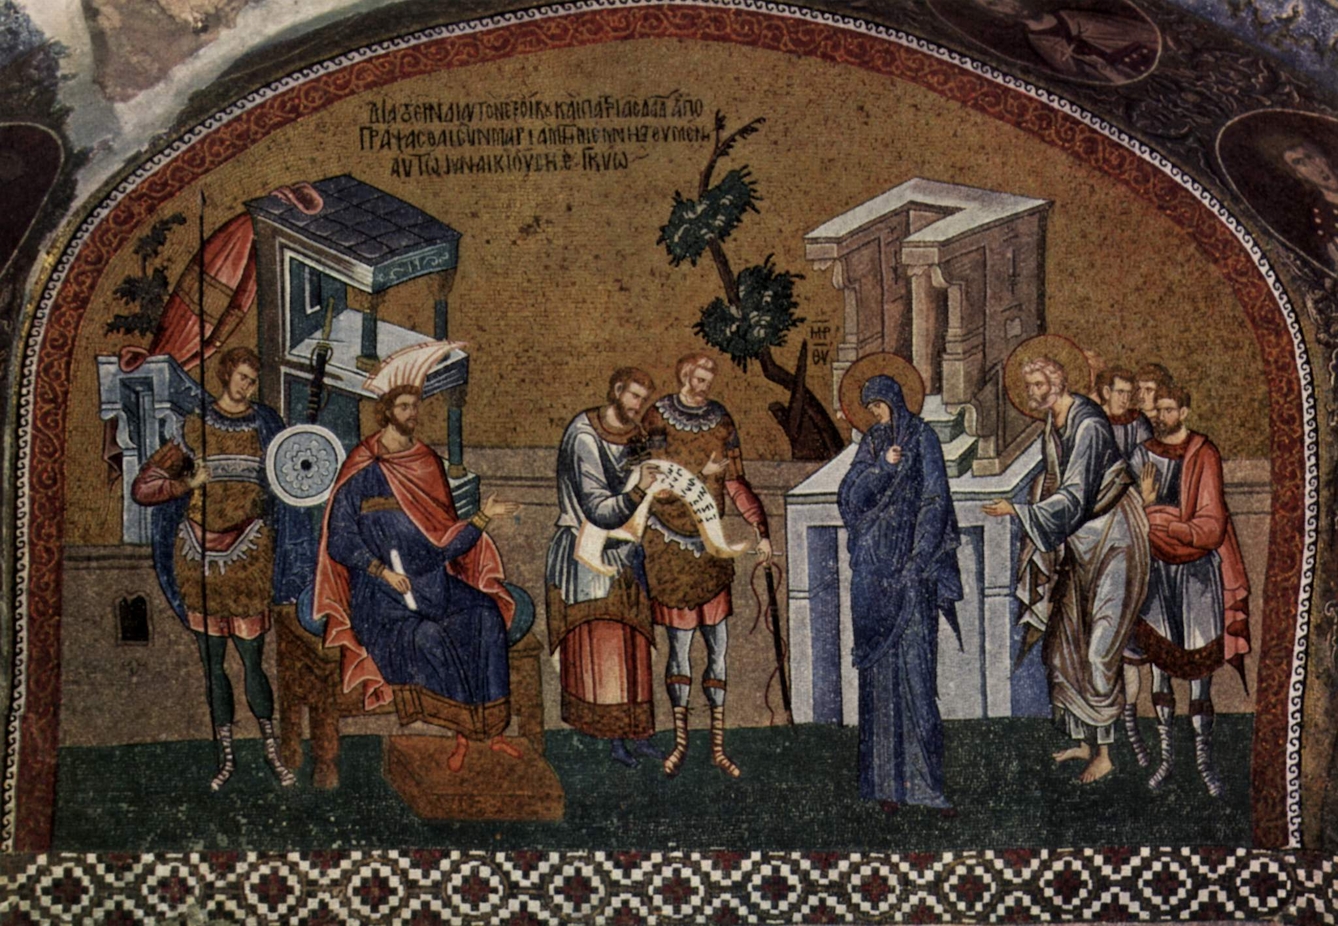 14th-century painting showing Mary and Joseph registering as part of the Census of Quirinius. They have halos around their heads and Mary is dressed in blue. Various officials stand in the background with documents. 